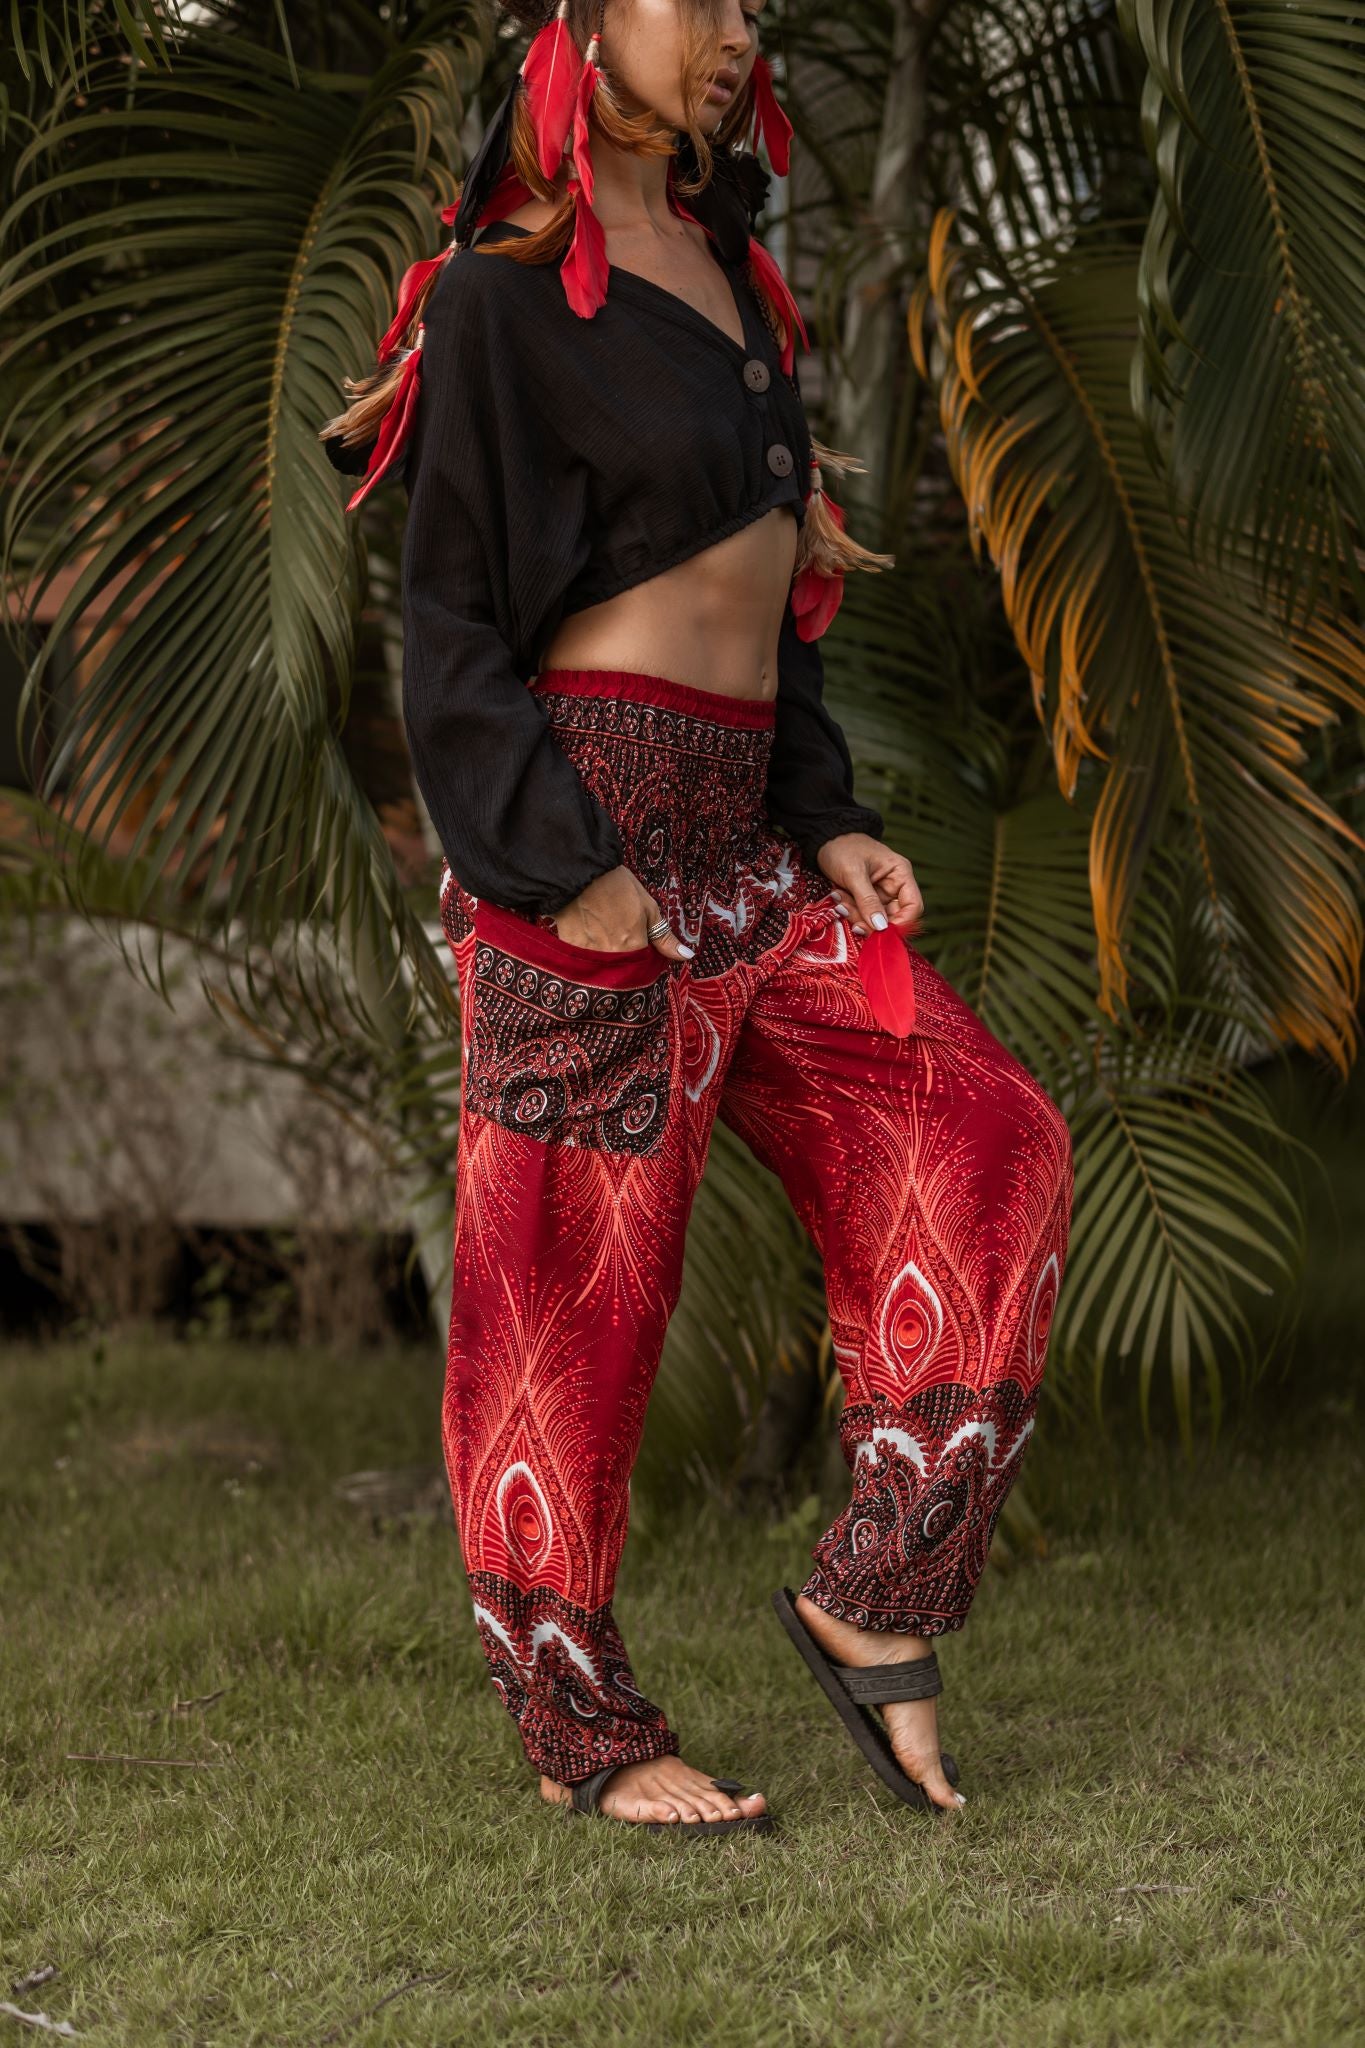 High Crotch Harem Pants - Vibrant Peacock Feather Print - Red